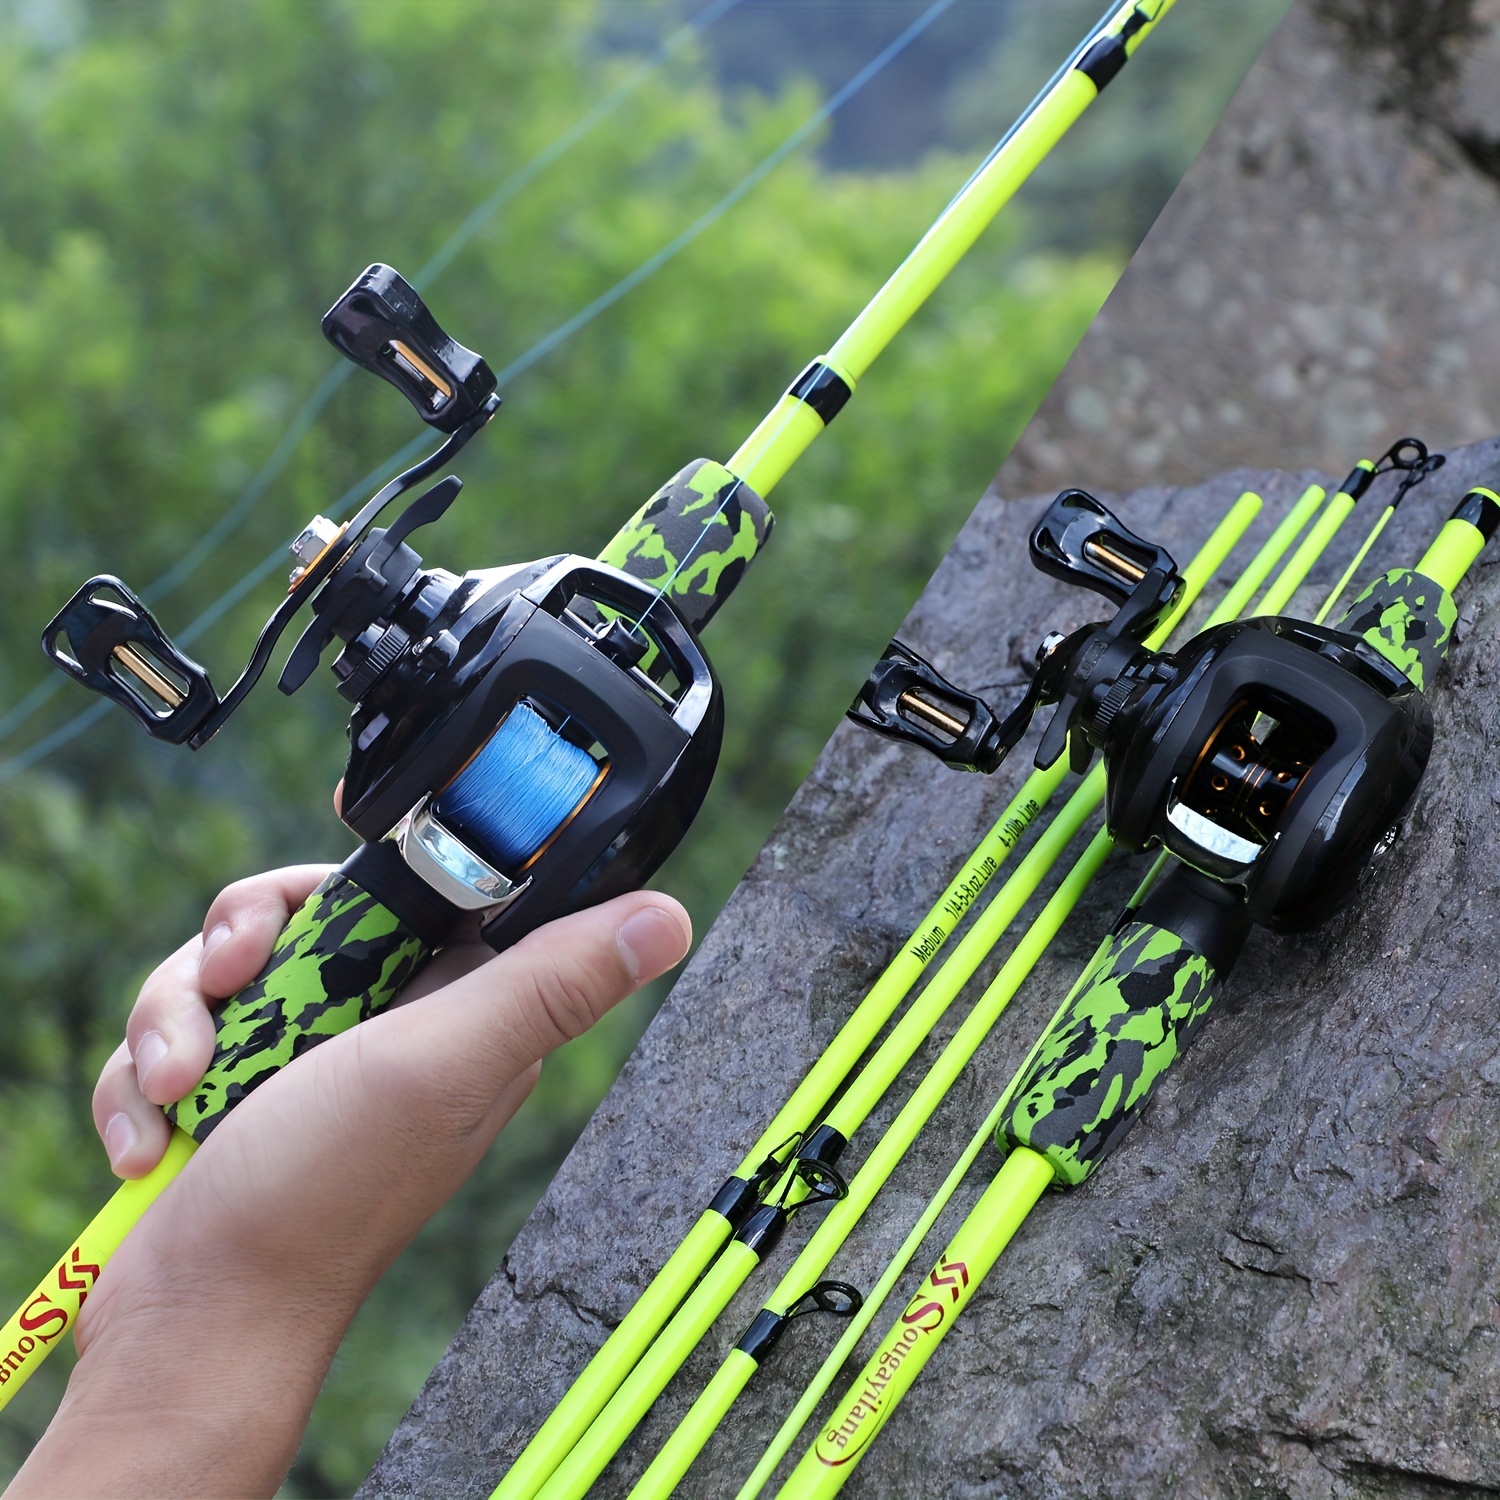 Fishing Rod Reel Lure Hook Connector Combos Casting Fishing Pole 5 Sections  With 13BB Baitcasting Reel Portable Travel Fishing